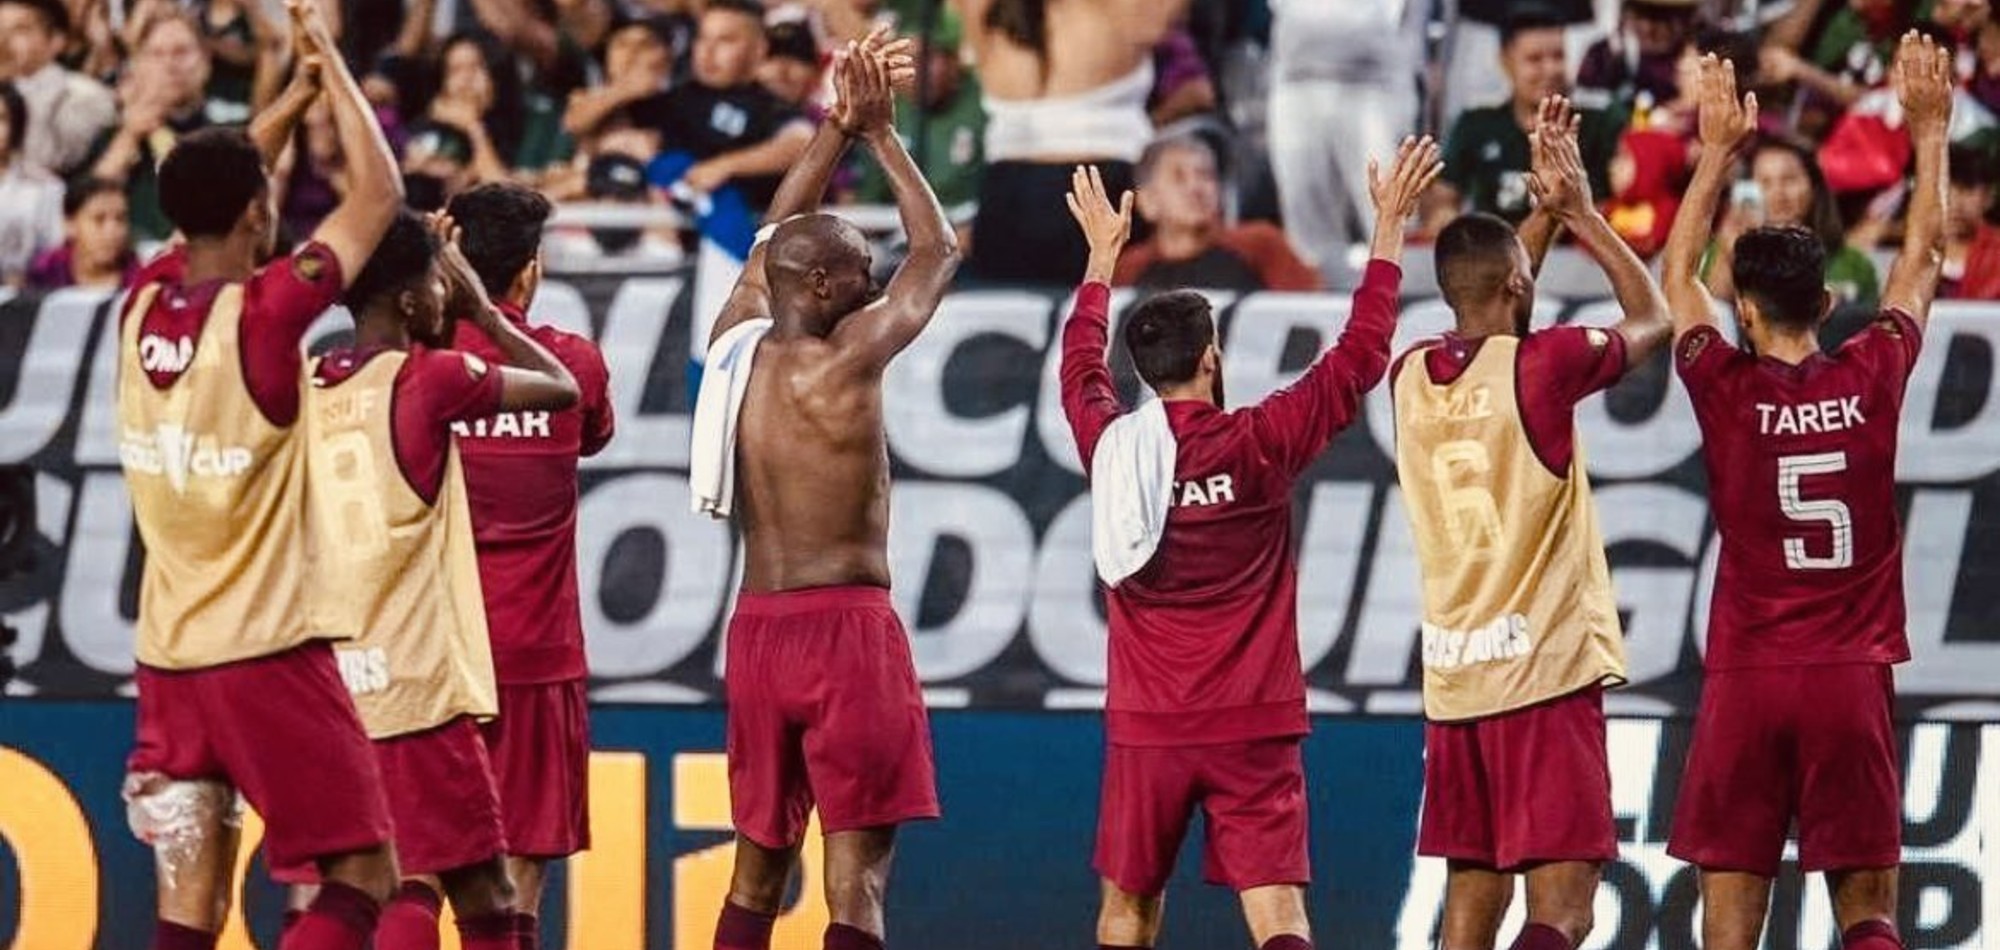 Qatar ready for the next step after downing El Salvador 3-2 in the quarterfinals